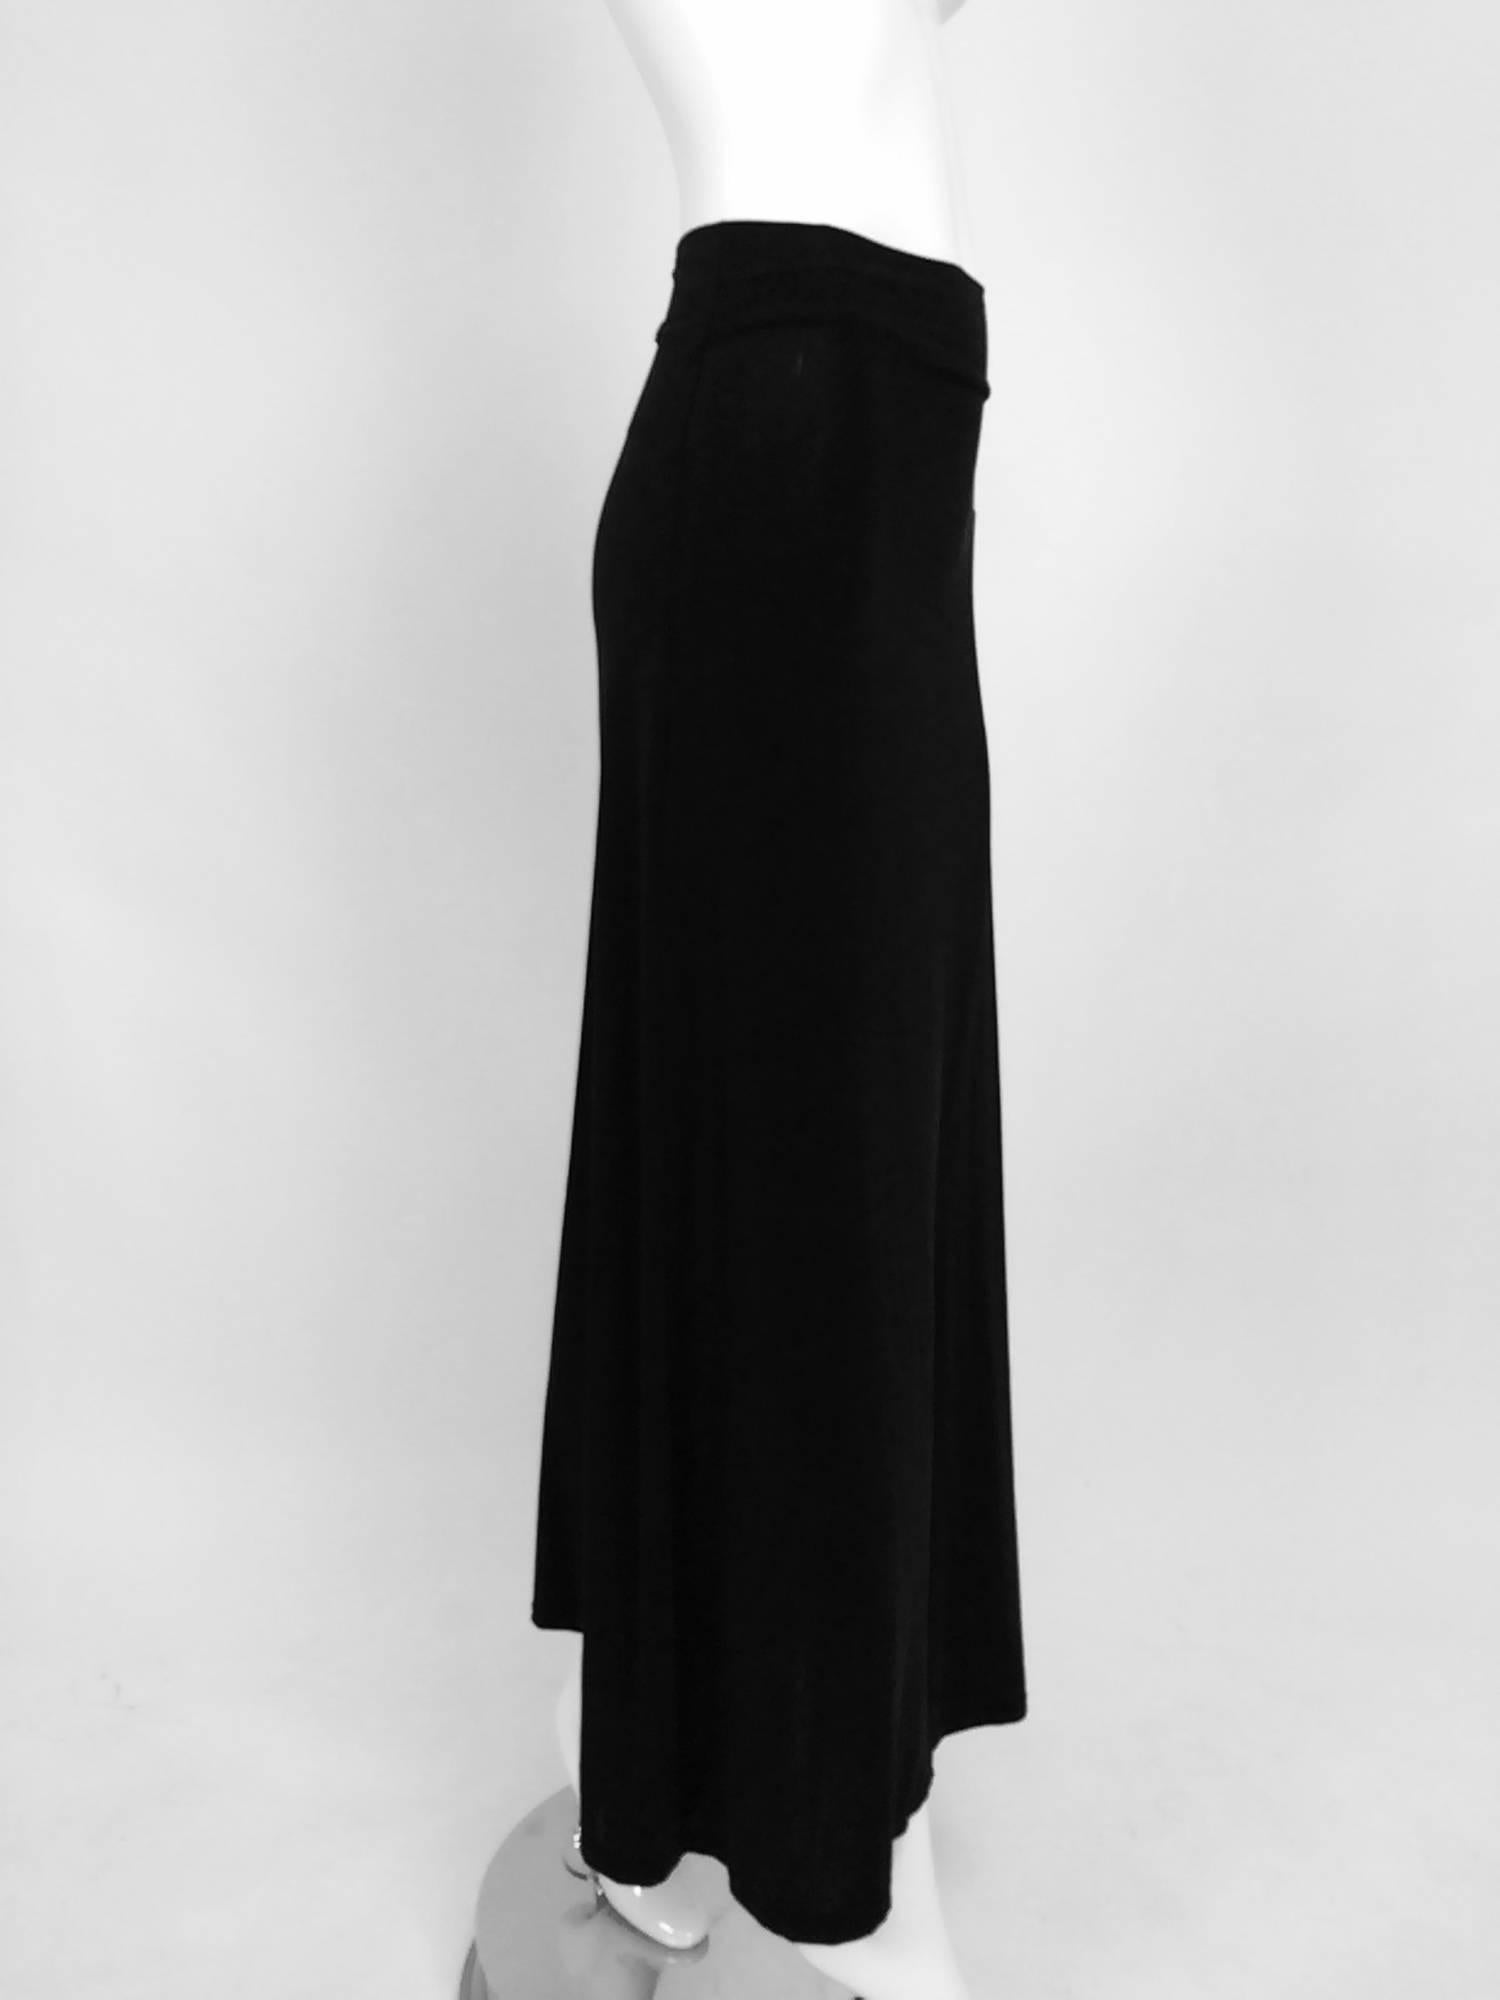 Vintage Issey Miyake silky black stretch jersey fold over waist A line maxi skirt from the 1990s...Pull on skirt with a turn over waist...Fits like a size small...Unlined...Stretch fabric.

In excellent wearable condition... All our clothing is